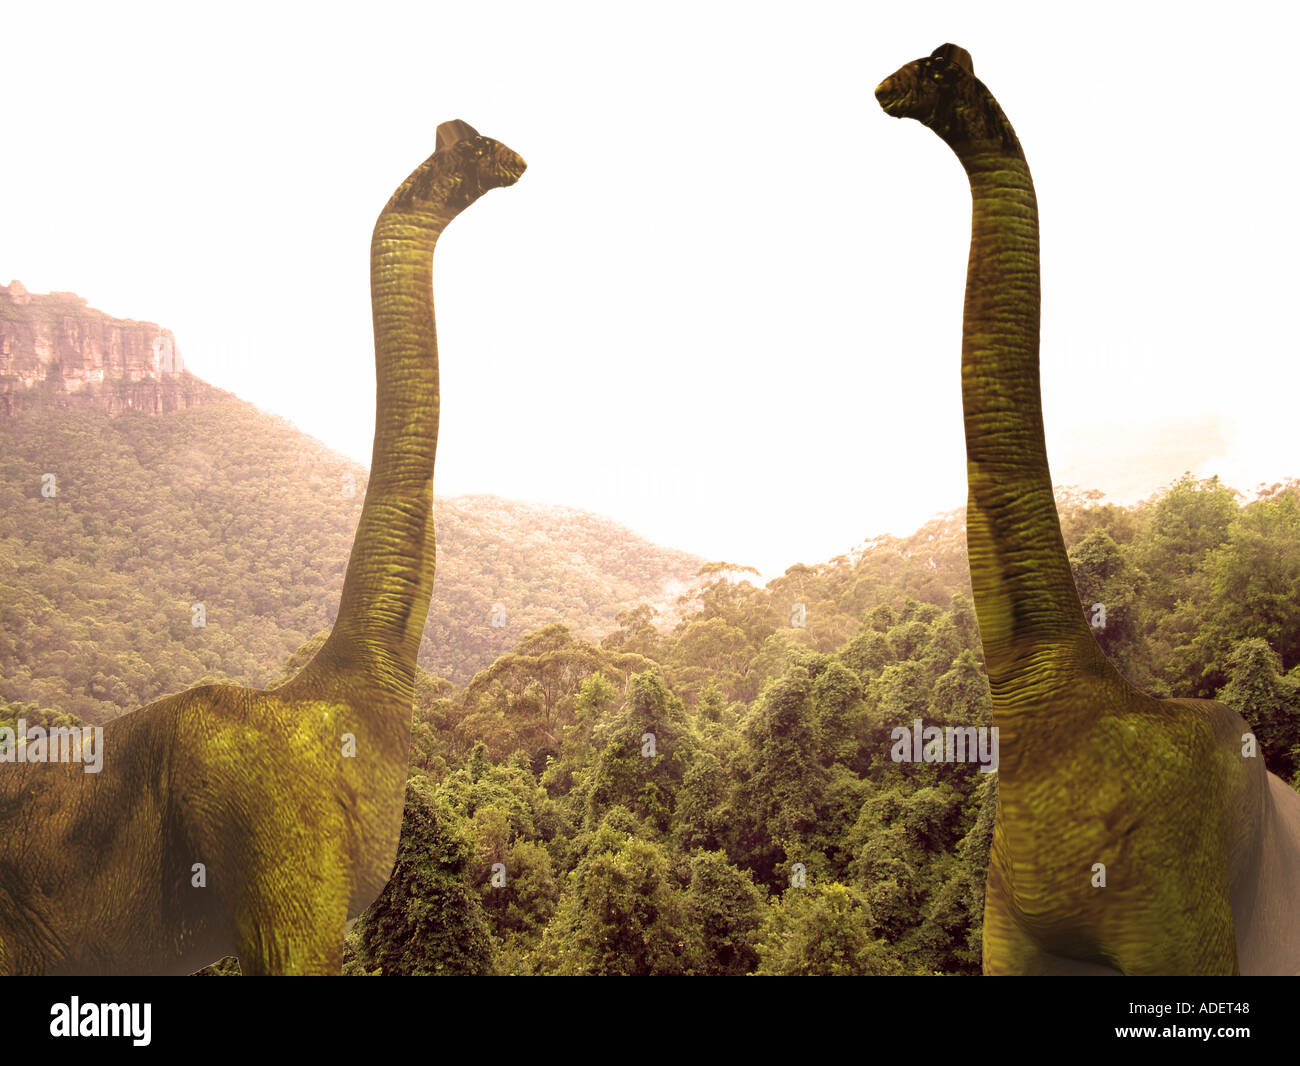 brachiosaurus dinosaur the tallest creature ever to have exsisted one of the sauropods computer 3d illustration Stock Photo